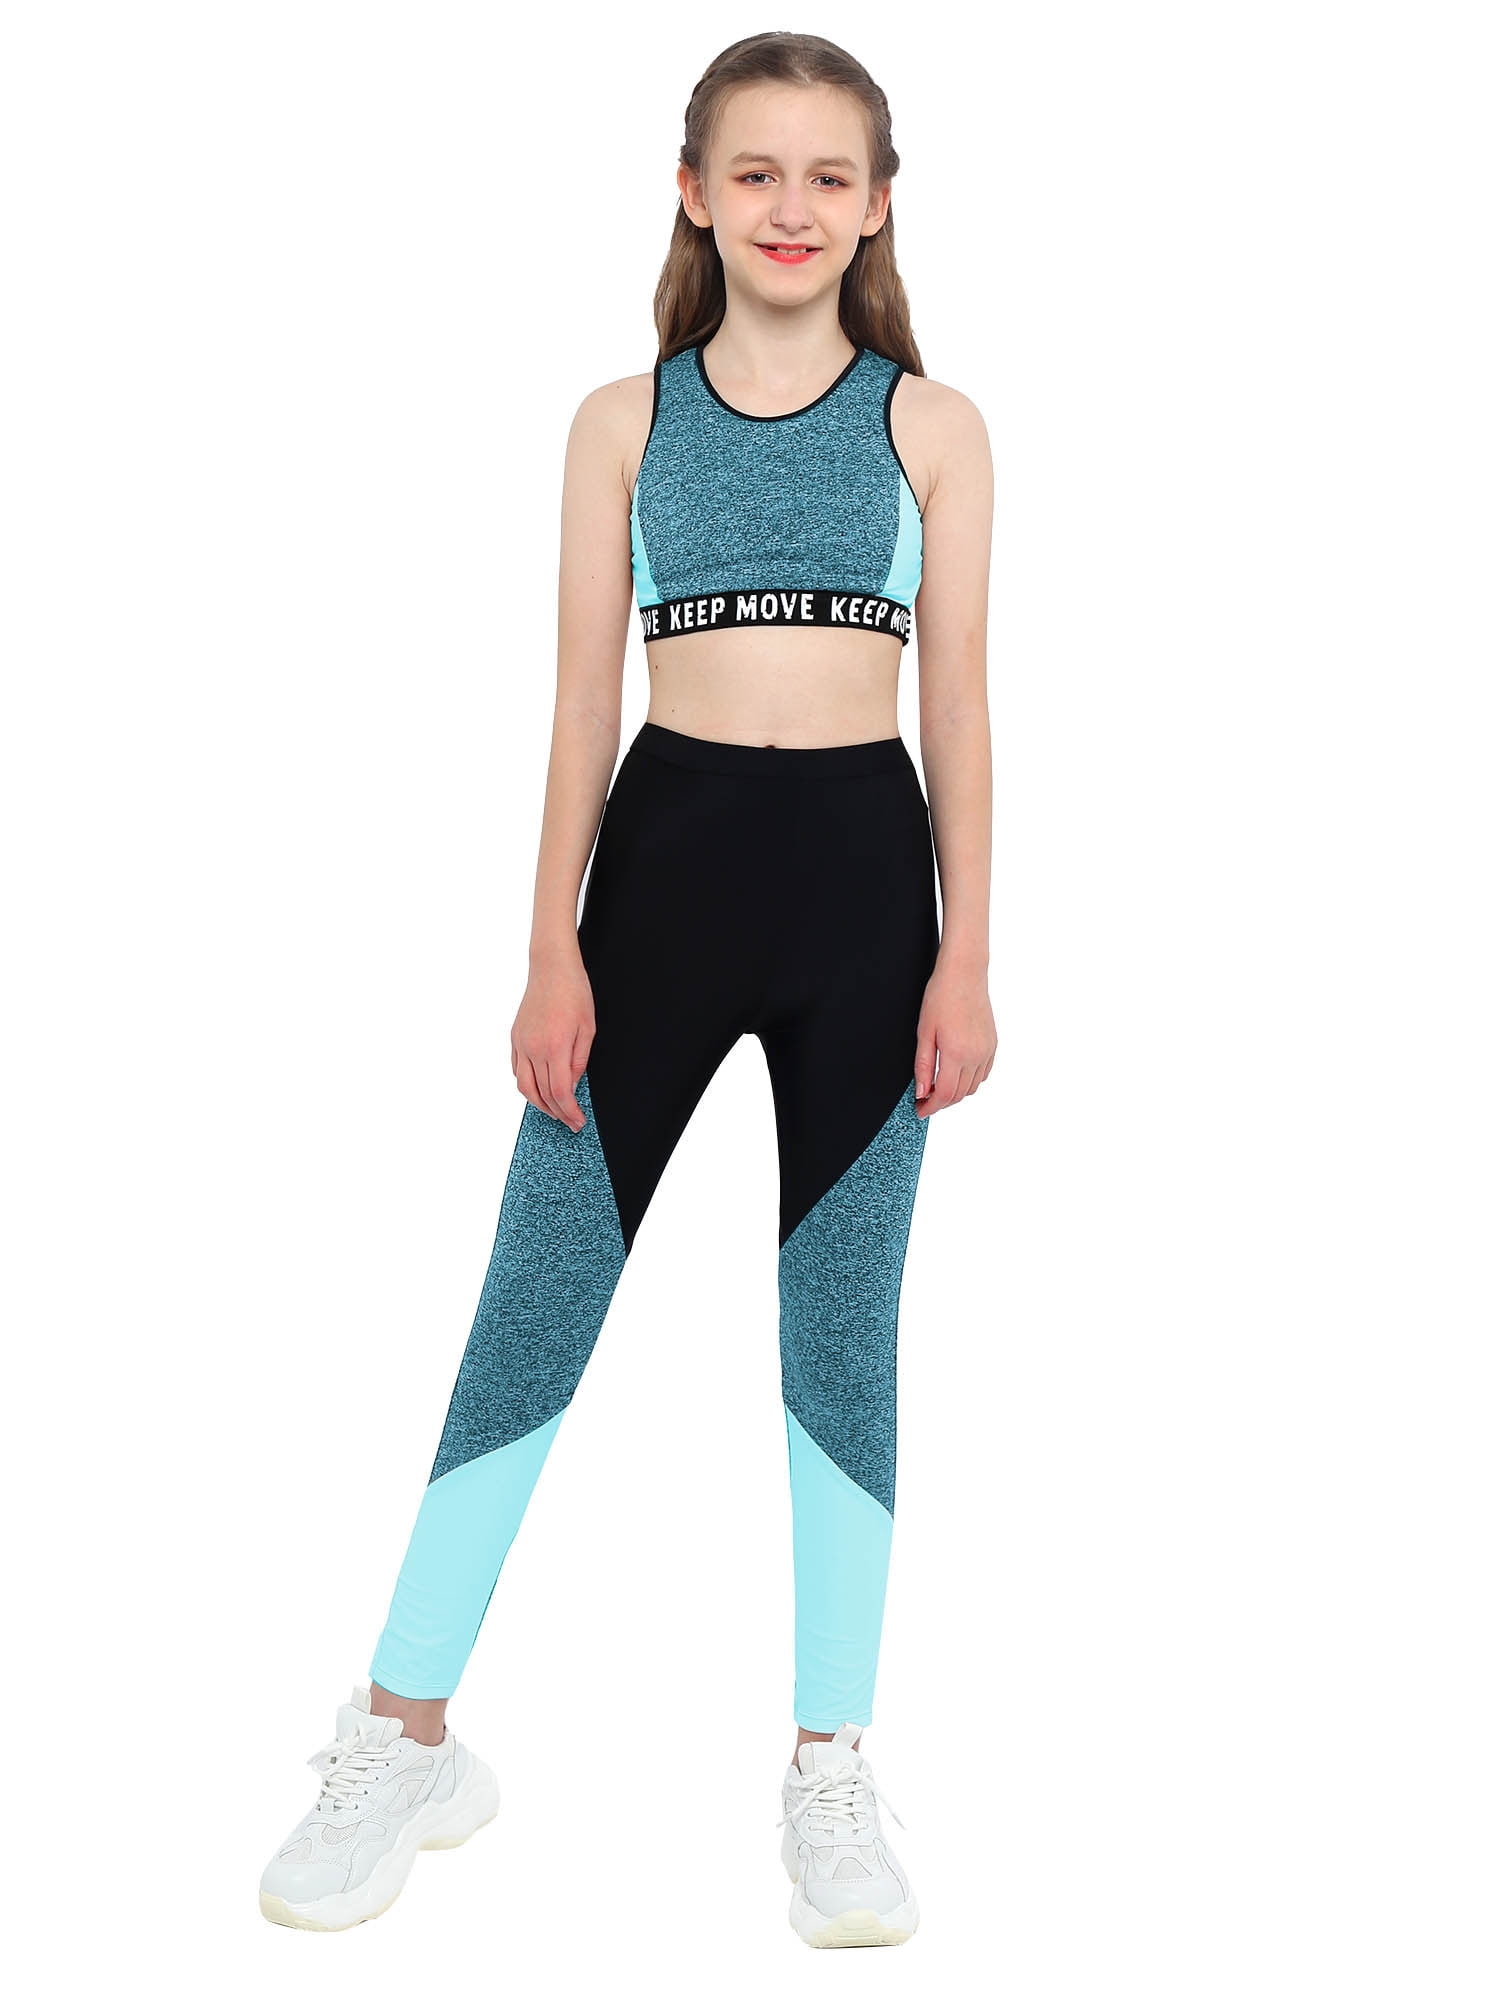 inhzoy Kids Girls Athletic Outfit Sports Bra Crop Top with Yoga